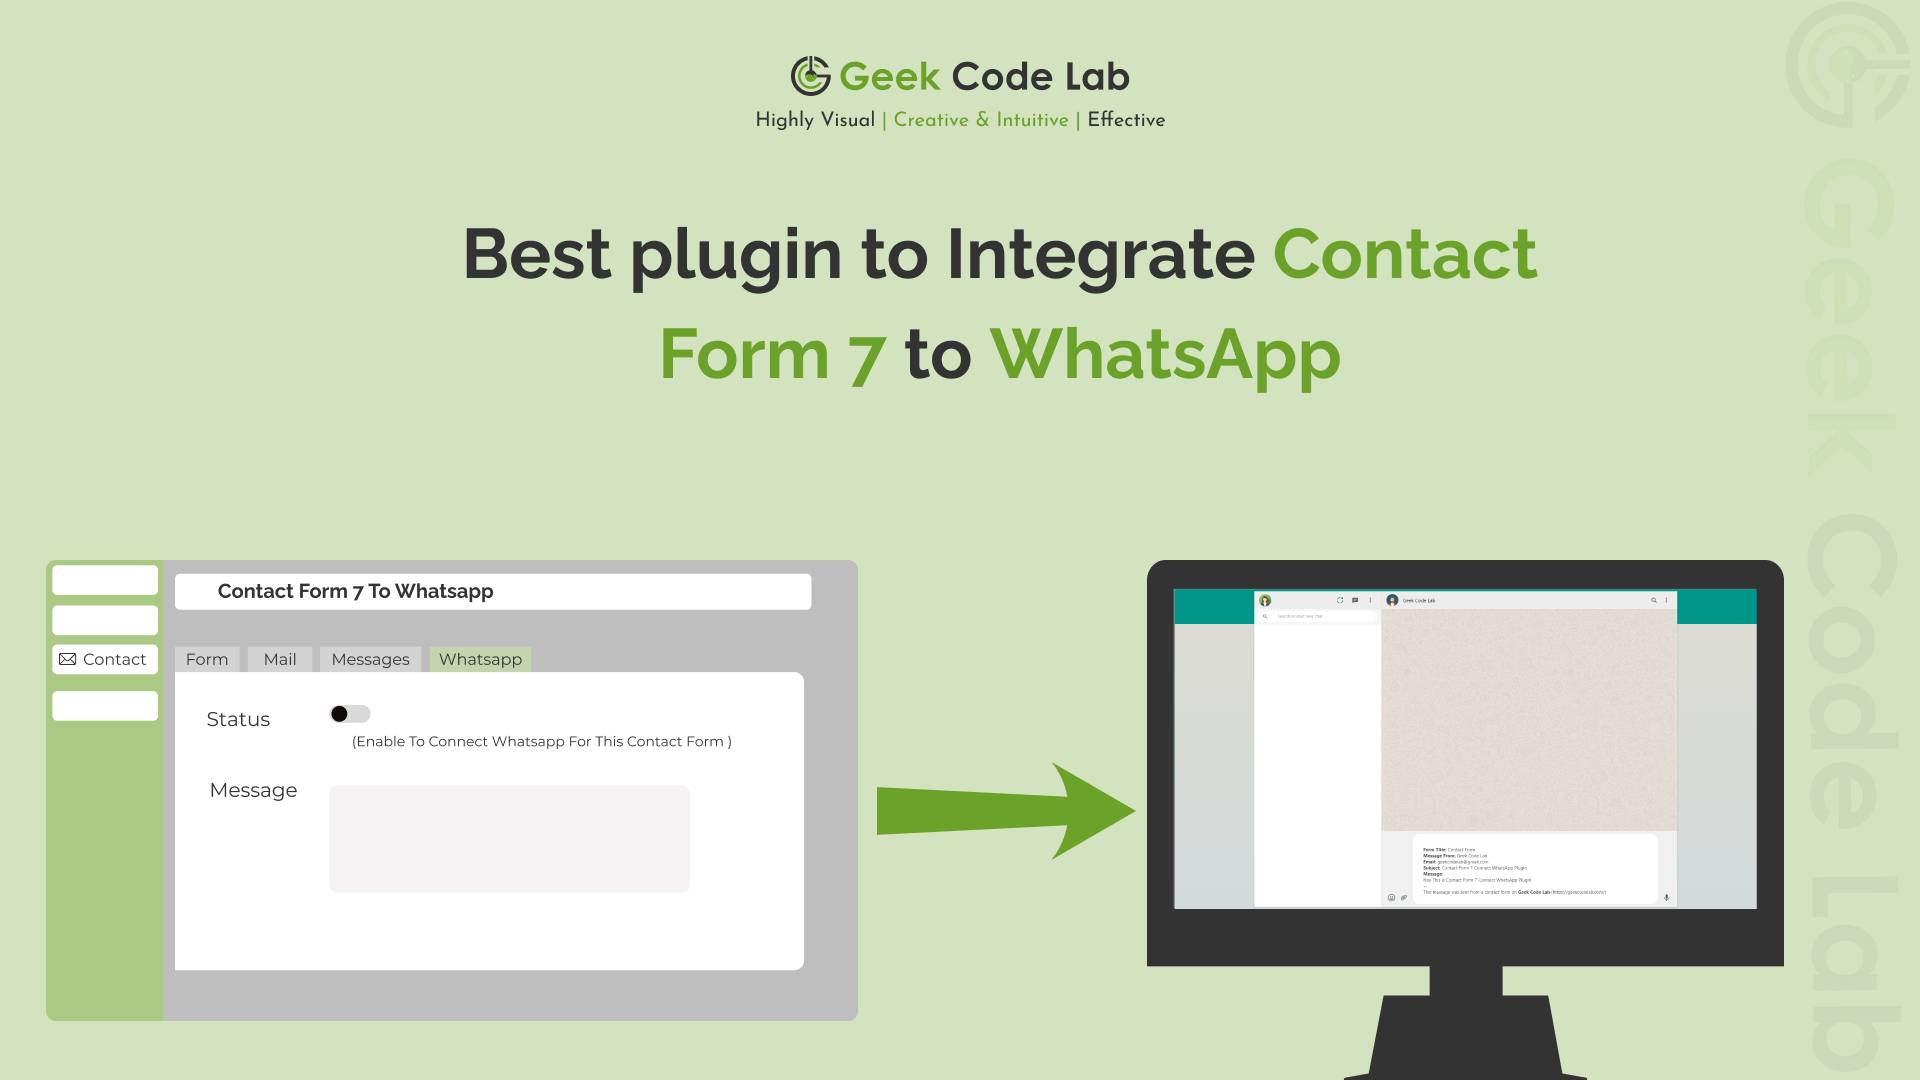 Best plugin to Integrate Contact Form 7 to WhatsApp